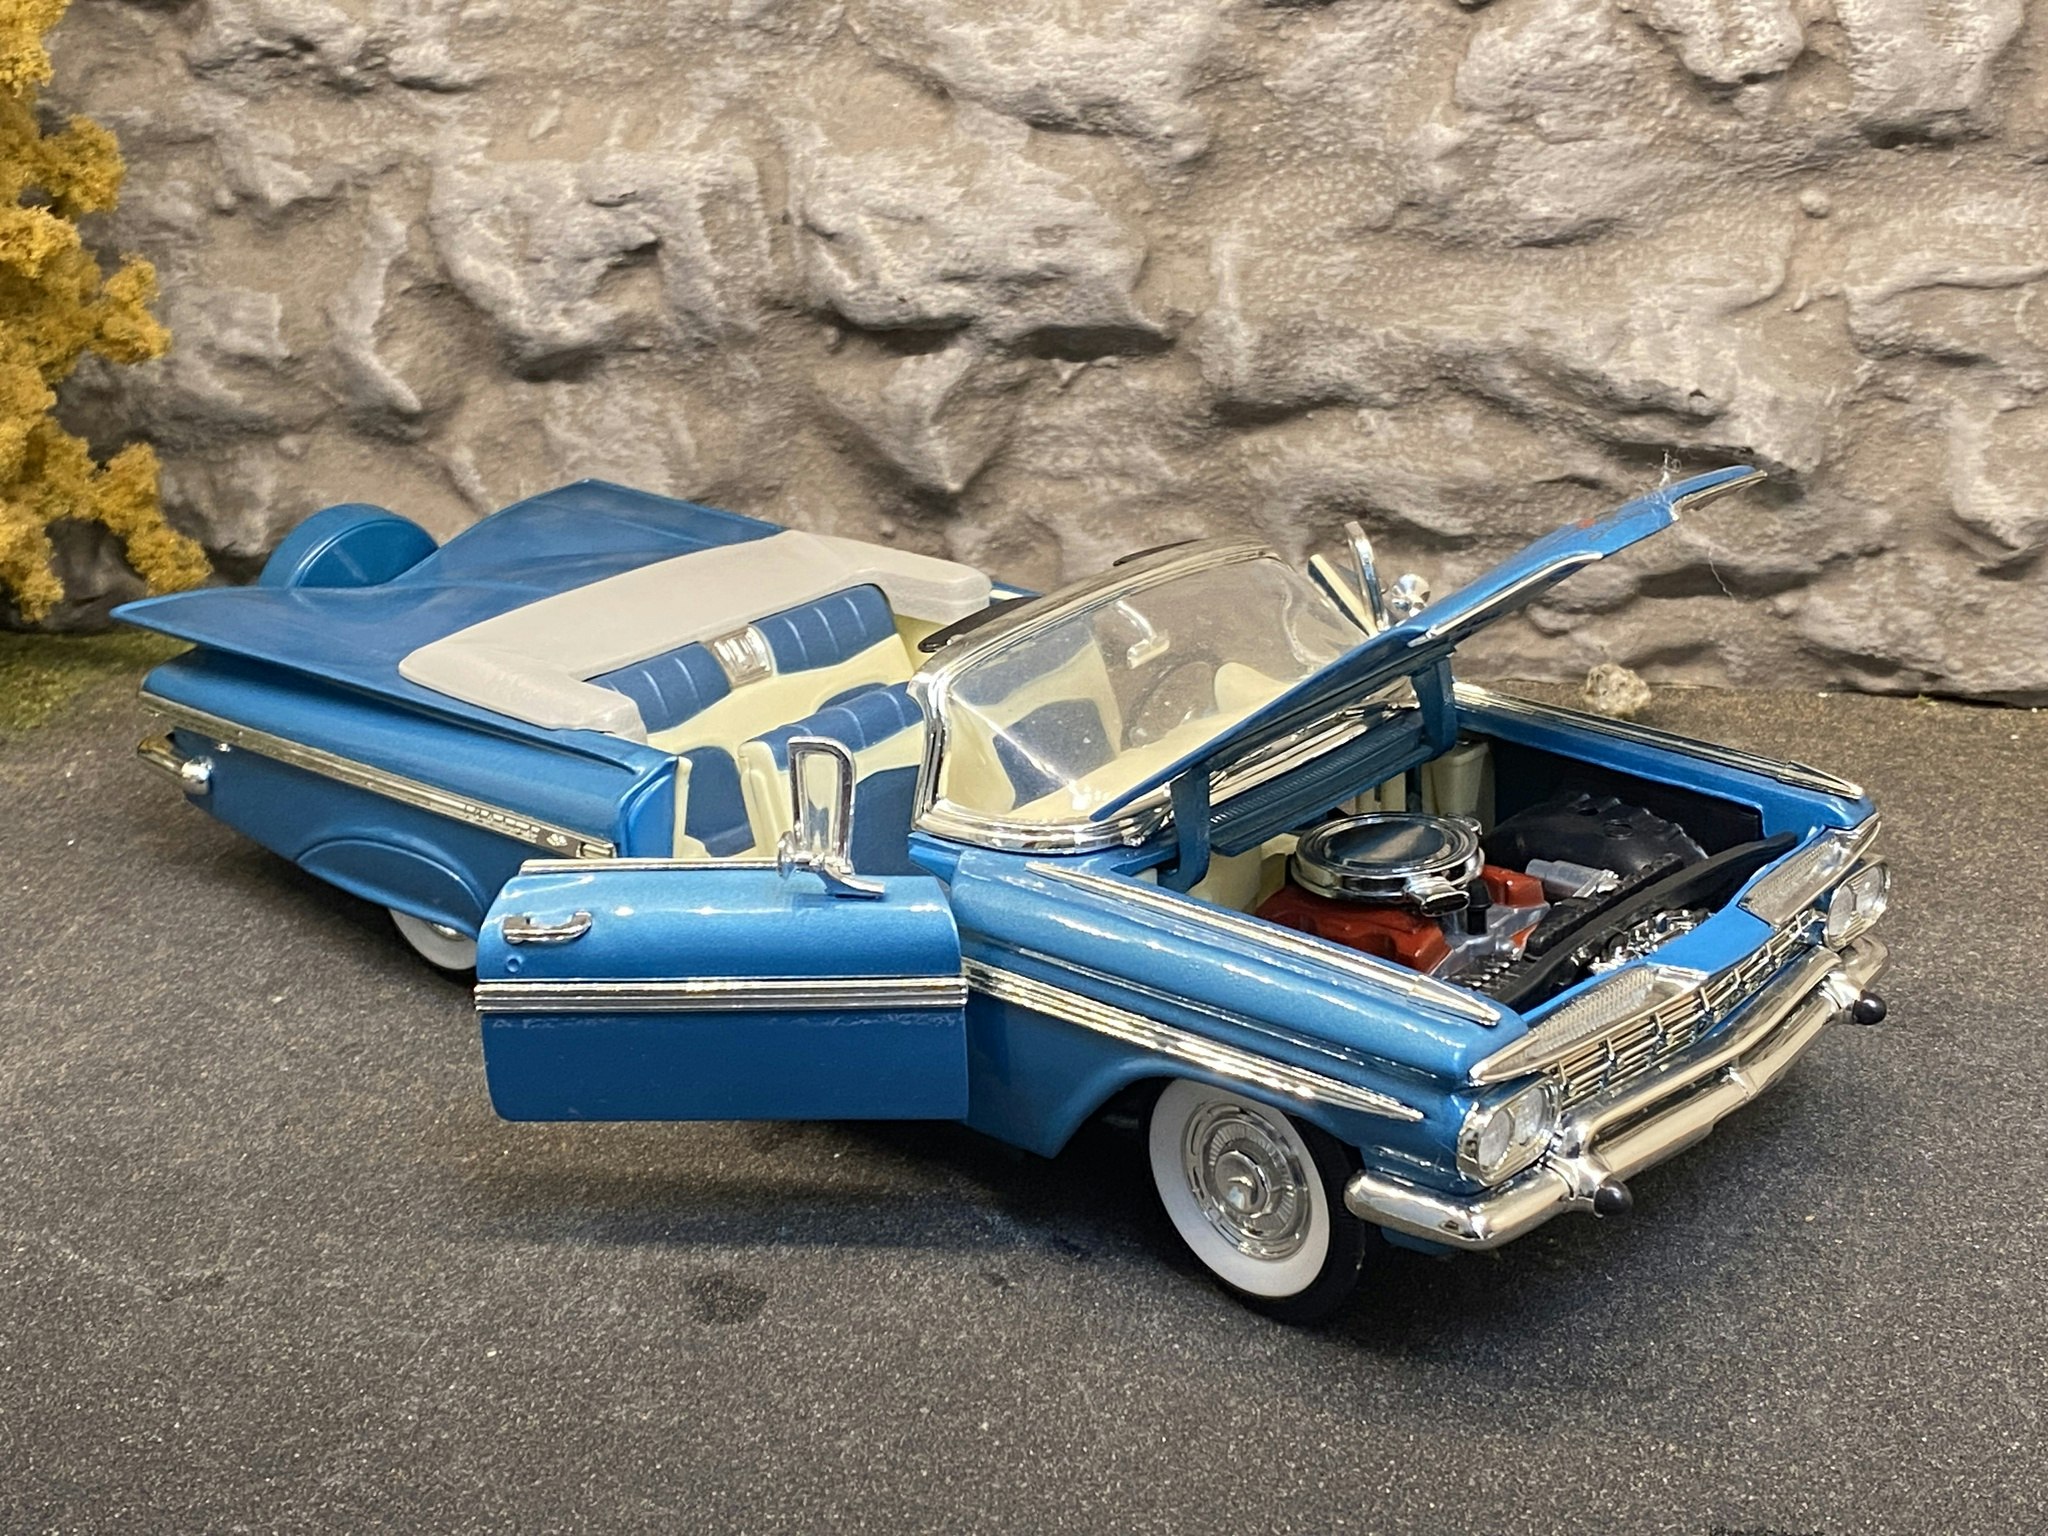 Skala 1/18 Chevrolet Impala 59' Blue fr Lucky Diecast "Road Signature Collection"